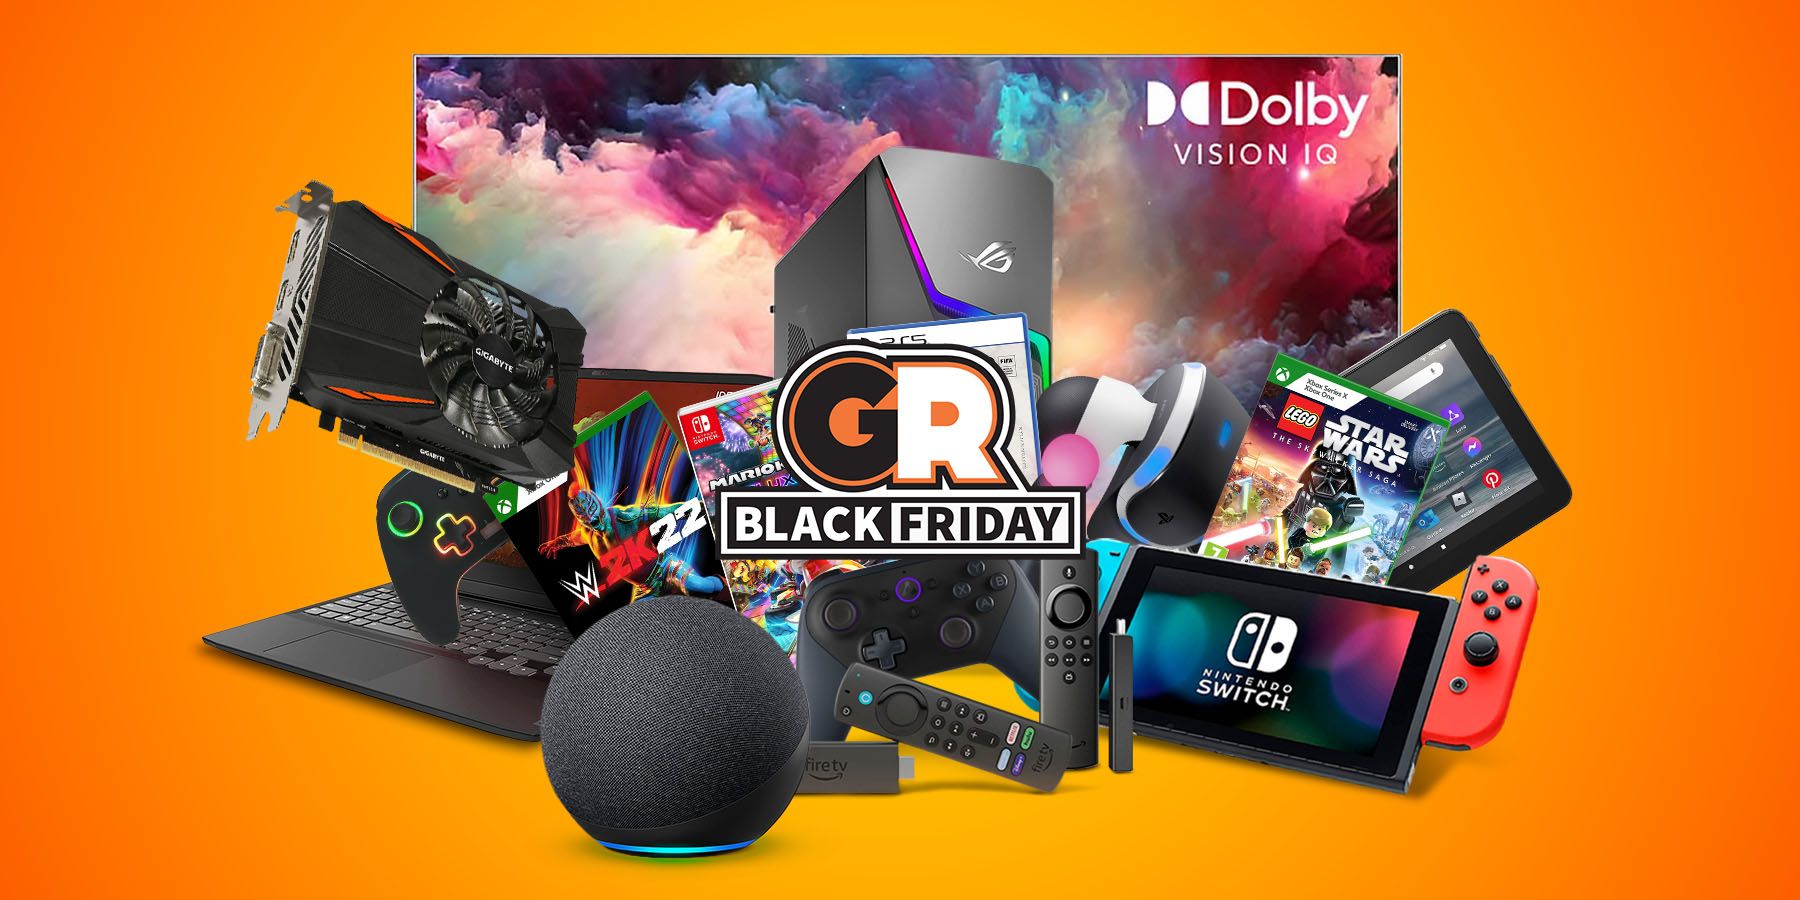 These are our favorite Black Friday gaming TV deals for PC gamers